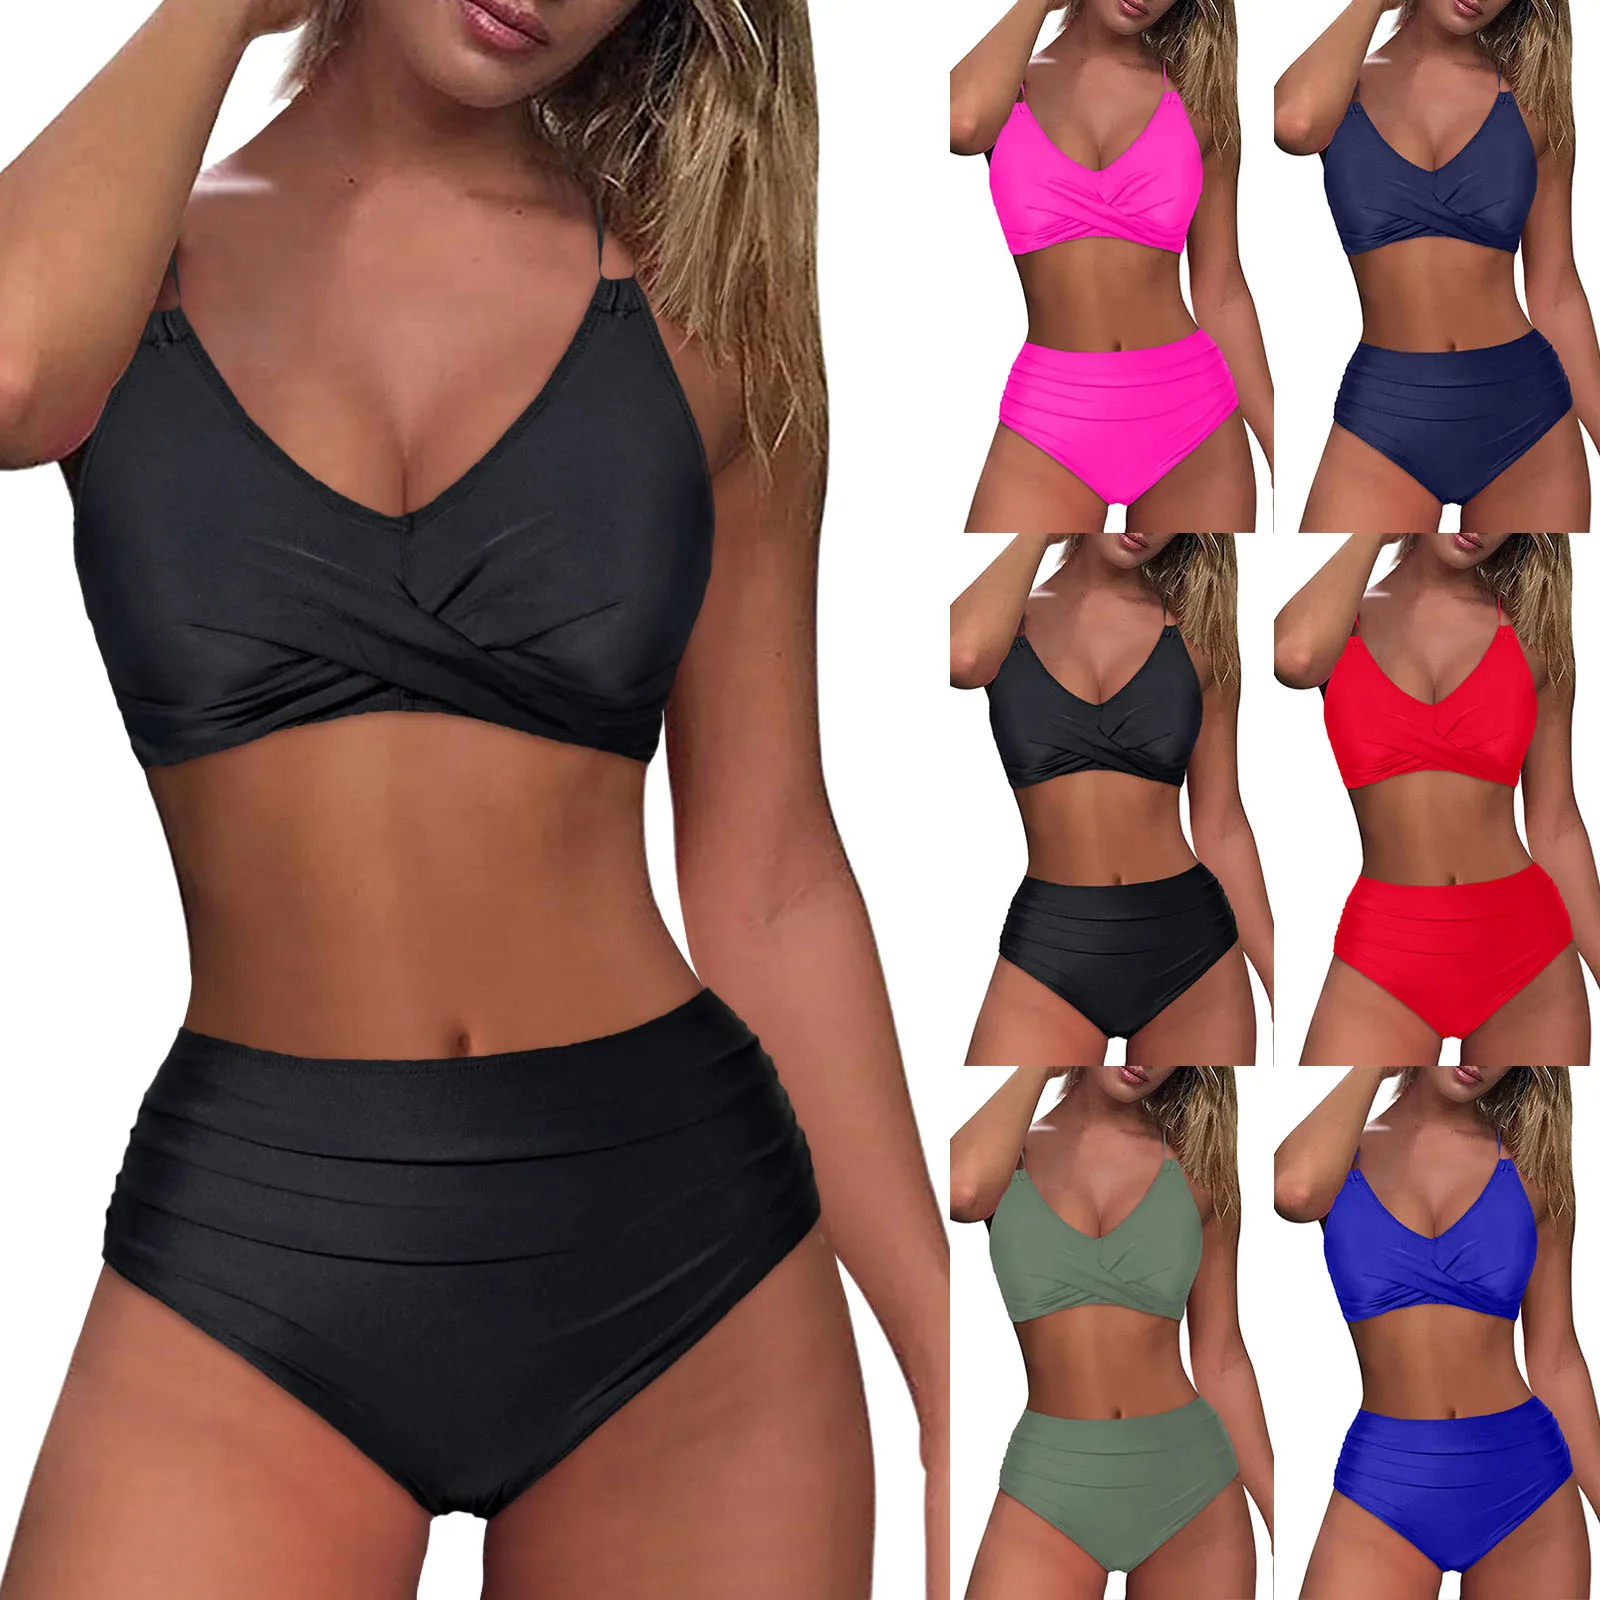 

Solid Color Womens High Waisted Bikini Push Up Vintage Swimsuits Halter Top Tummy Control Ruched Bottom Two Piece Bathing Suits